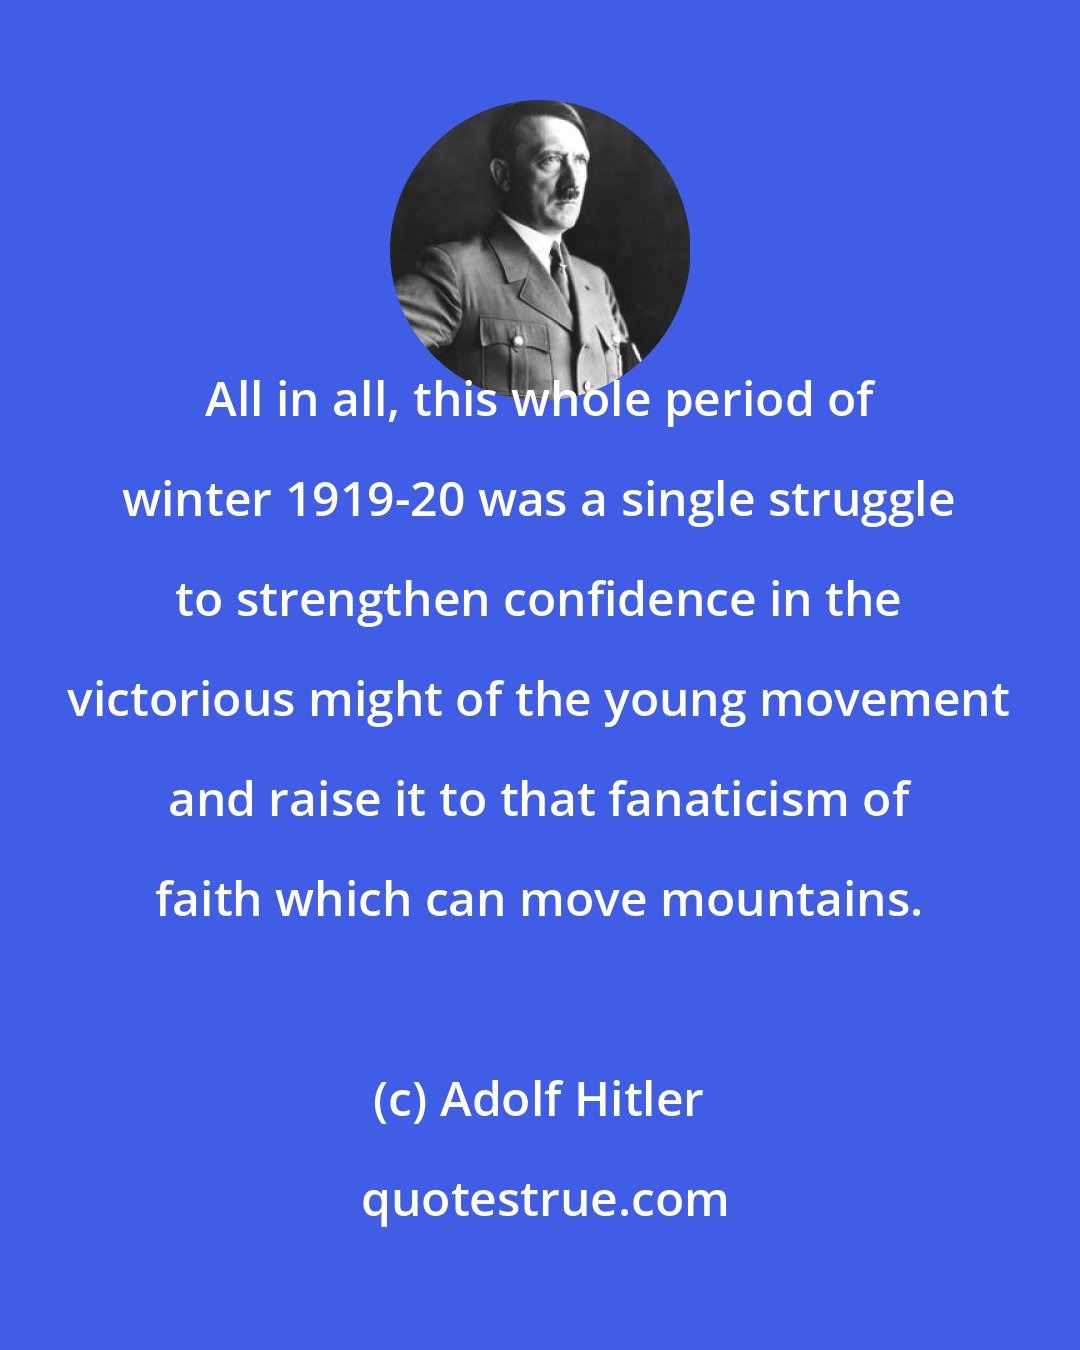 Adolf Hitler: All in all, this whole period of winter 1919-20 was a single struggle to strengthen confidence in the victorious might of the young movement and raise it to that fanaticism of faith which can move mountains.